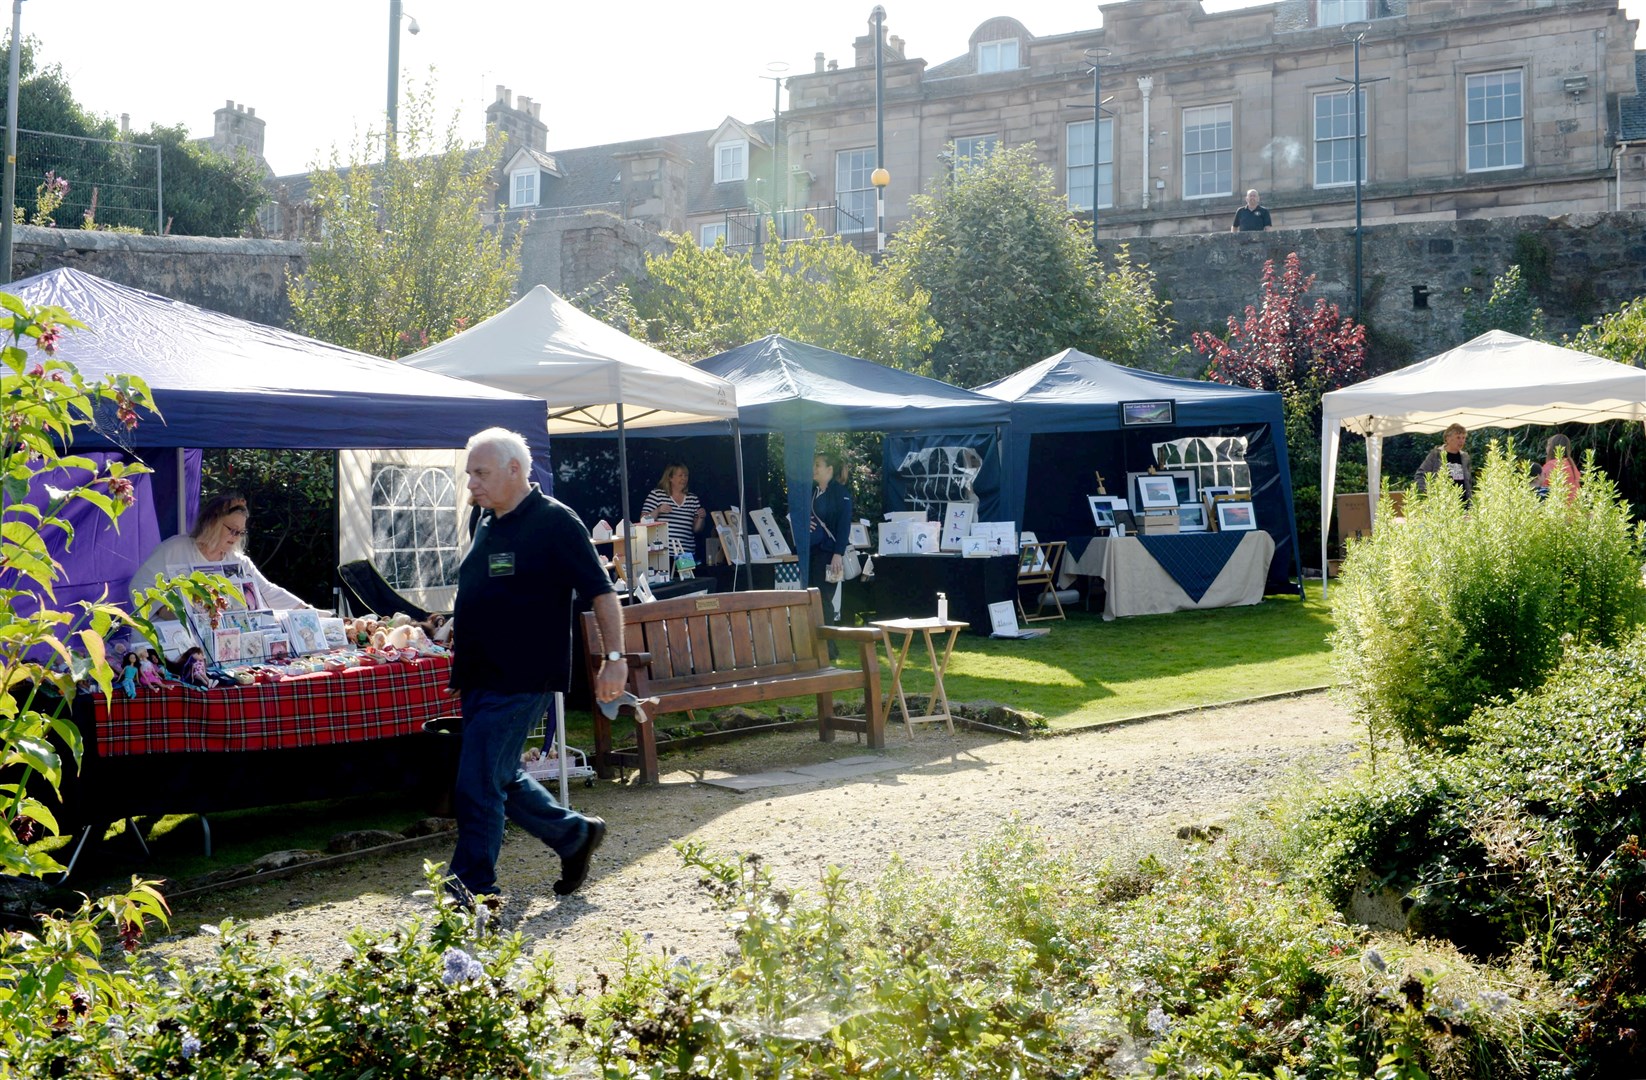 One of last year's outdoor markets in the Tain Rose Garden. Picture: James Mackenzie